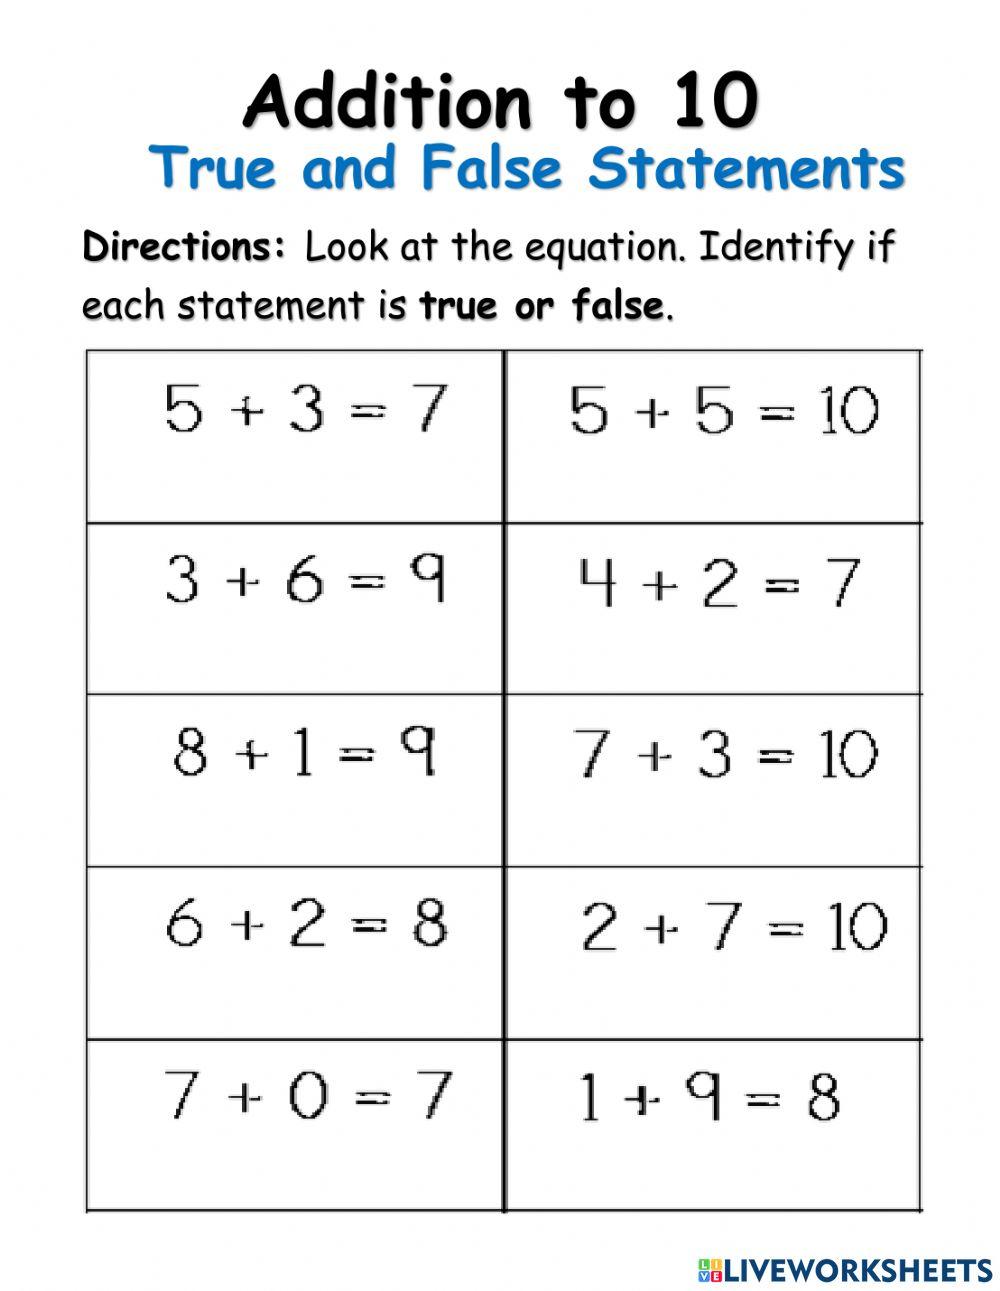 Addition - True and False Statements